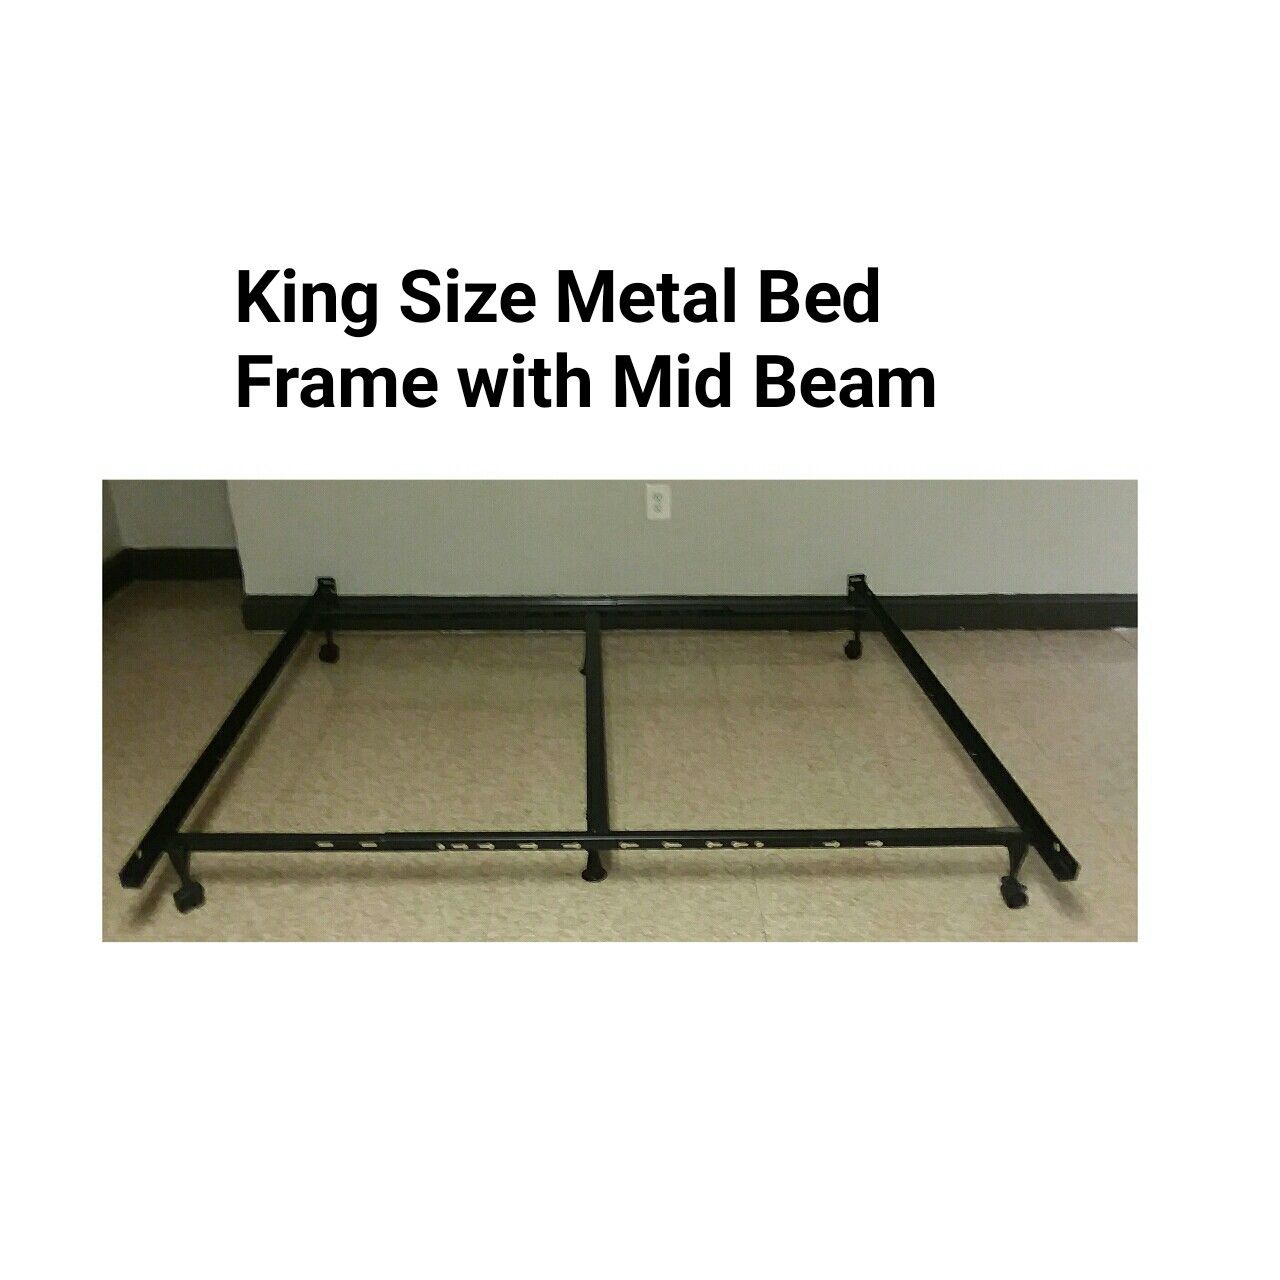 King Size Metal Bed Frame with Mid Beam